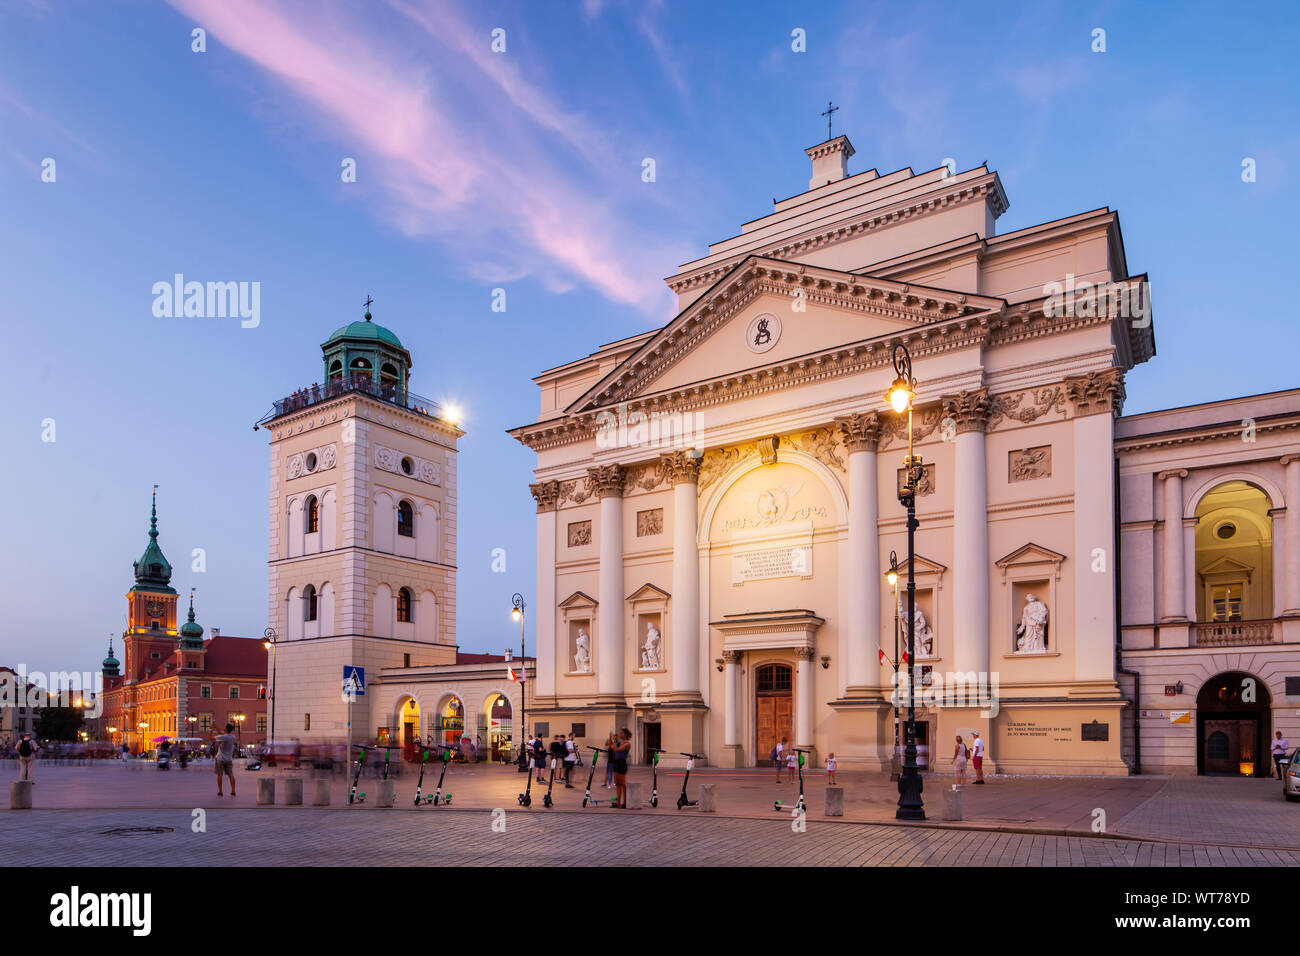 Evening at St Anne's Church in Warsaw, Poland. Stock Photo